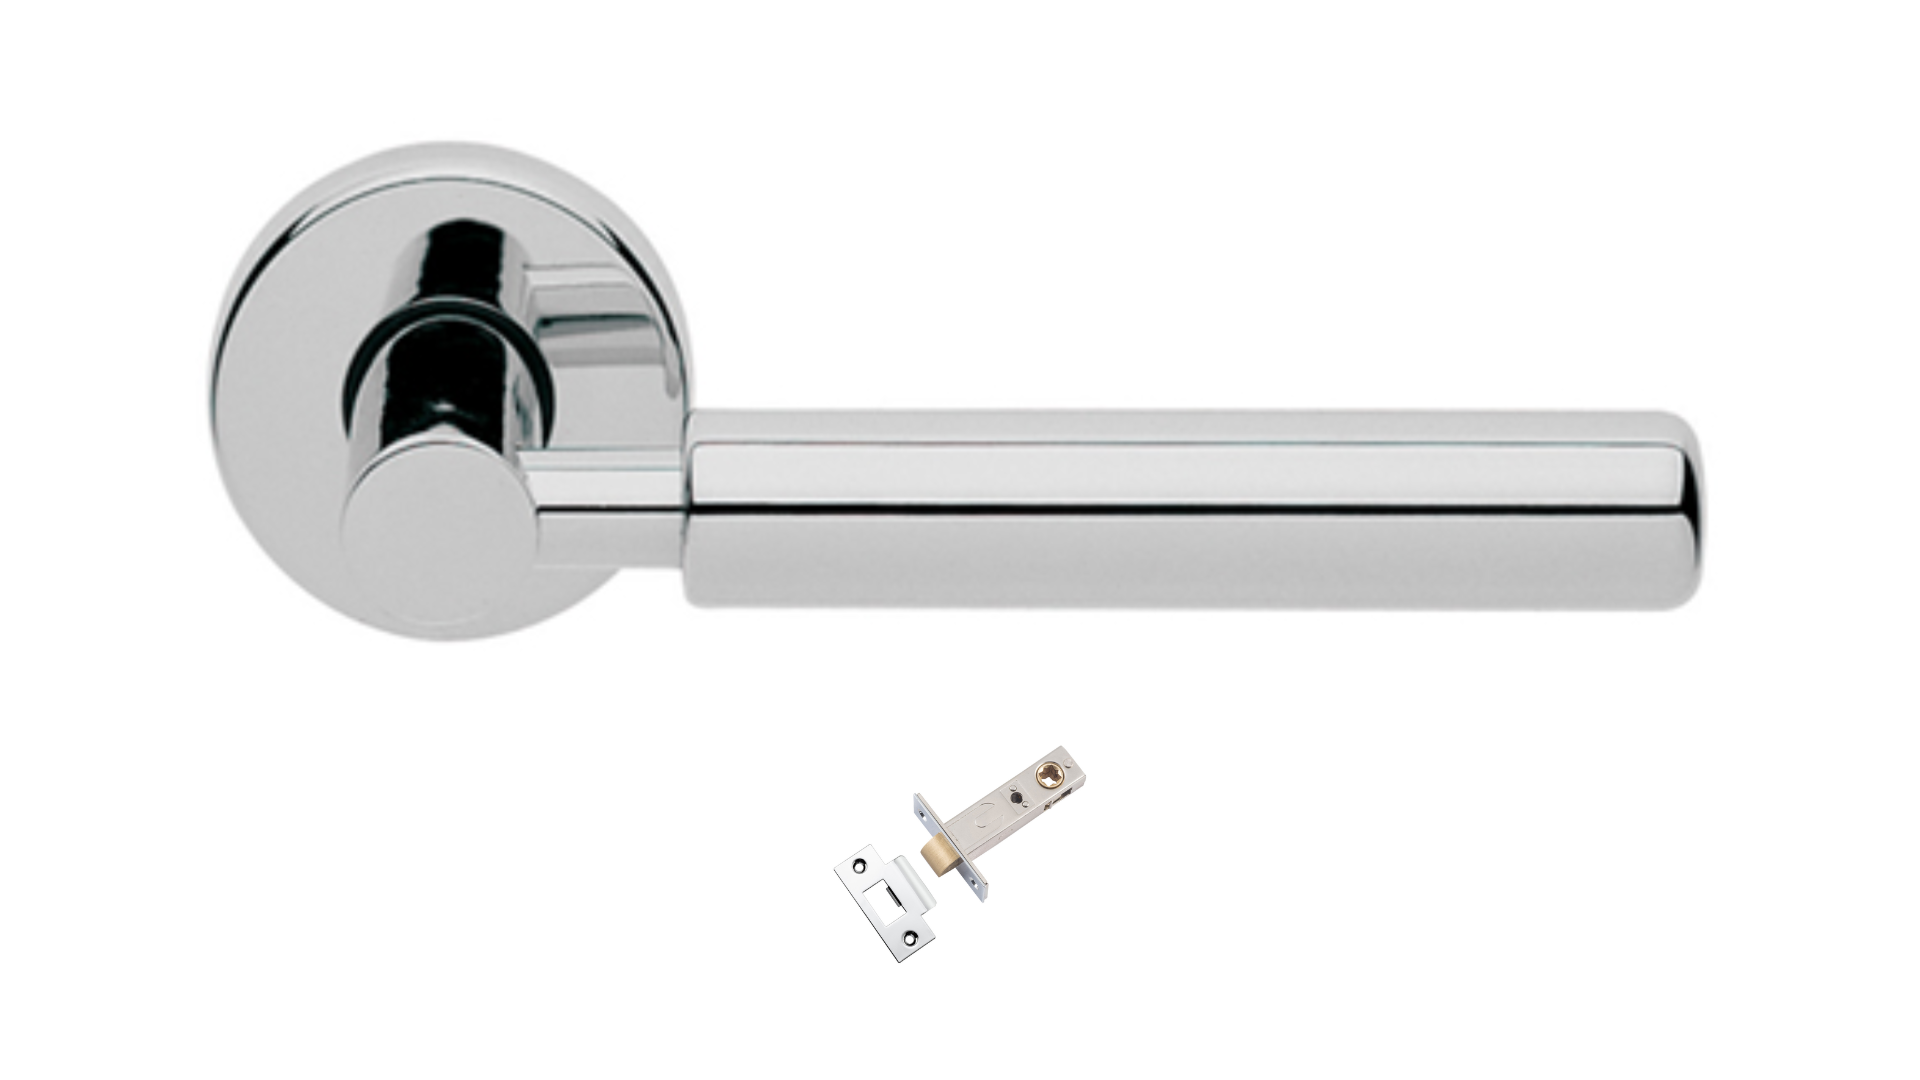 Product picture of the Amletto Polished Chrome Door Handle with separate privacy tubular latch on a white background.